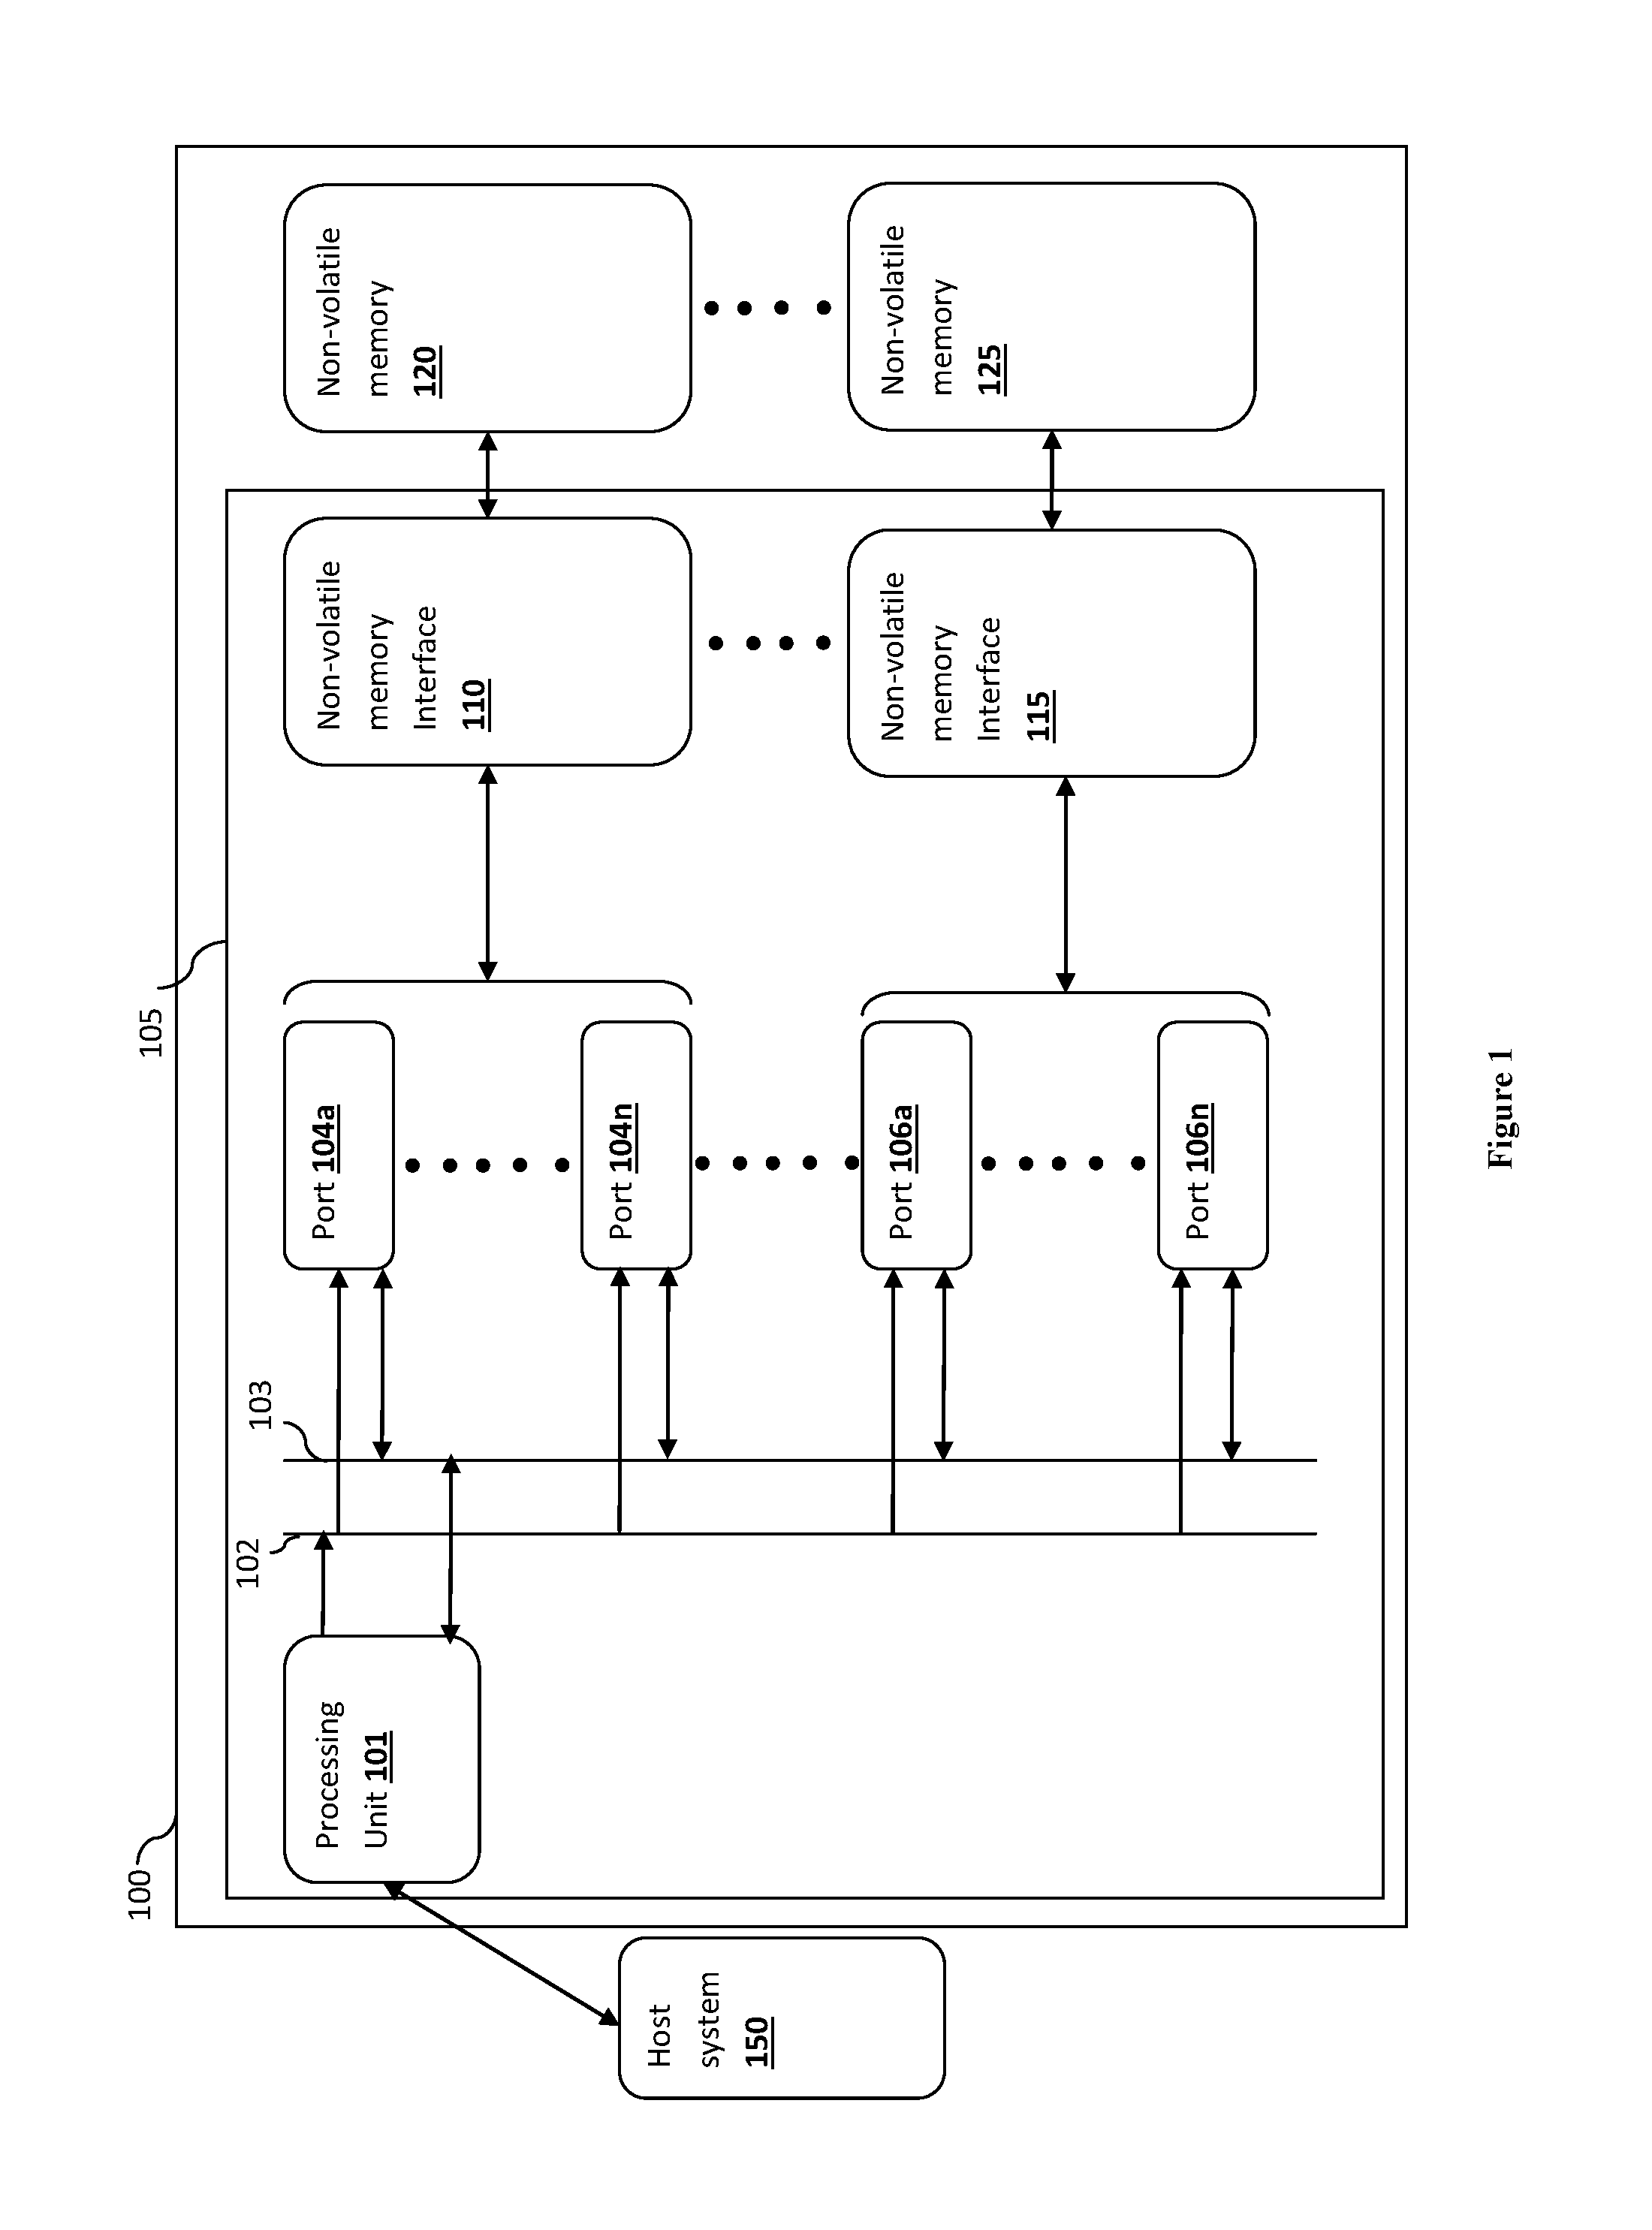 Apparatus, System, and Method of Look-Ahead Address Scheduling and Autonomous Broadcasting Operation to Non-Volatile Storage Memory